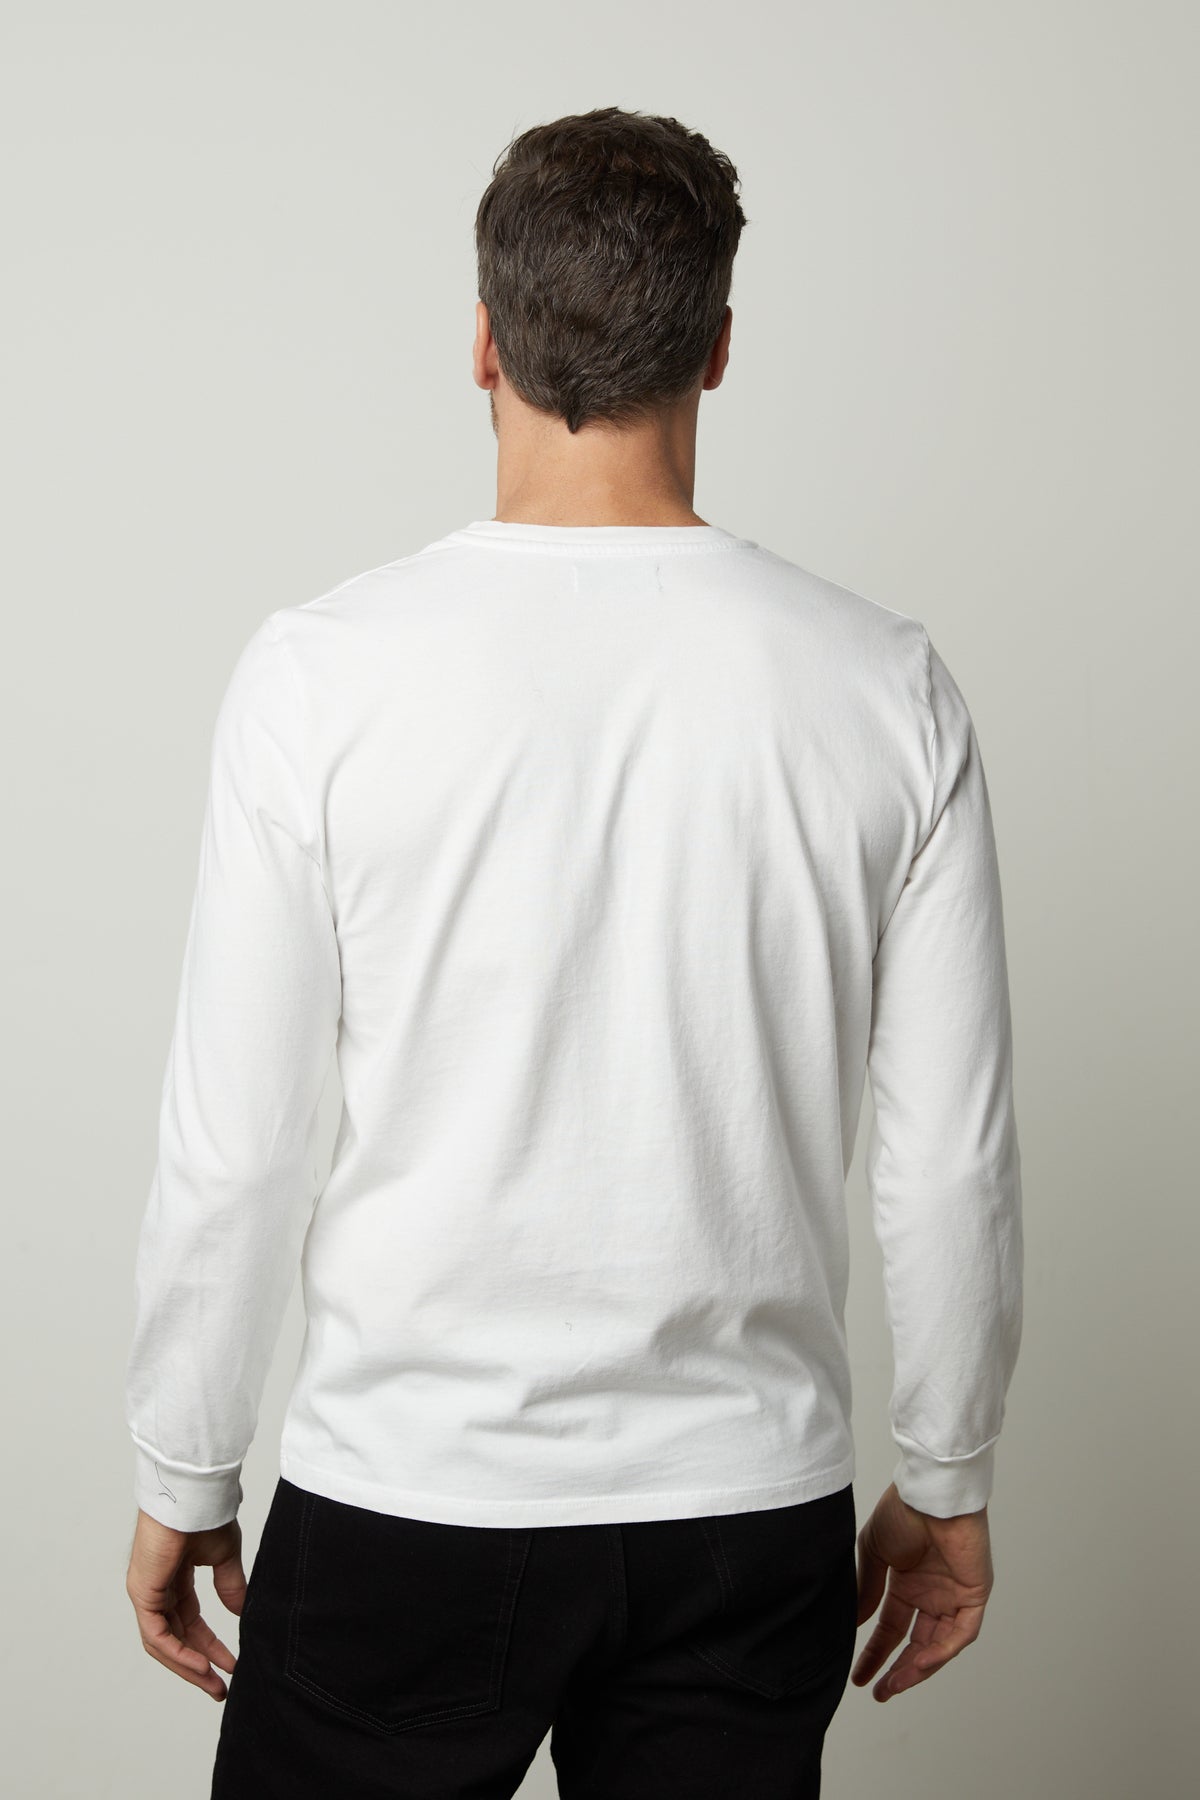 The back view of a man wearing a Velvet by Graham & Spencer REMI HENLEY t - shirt.-26846369513665